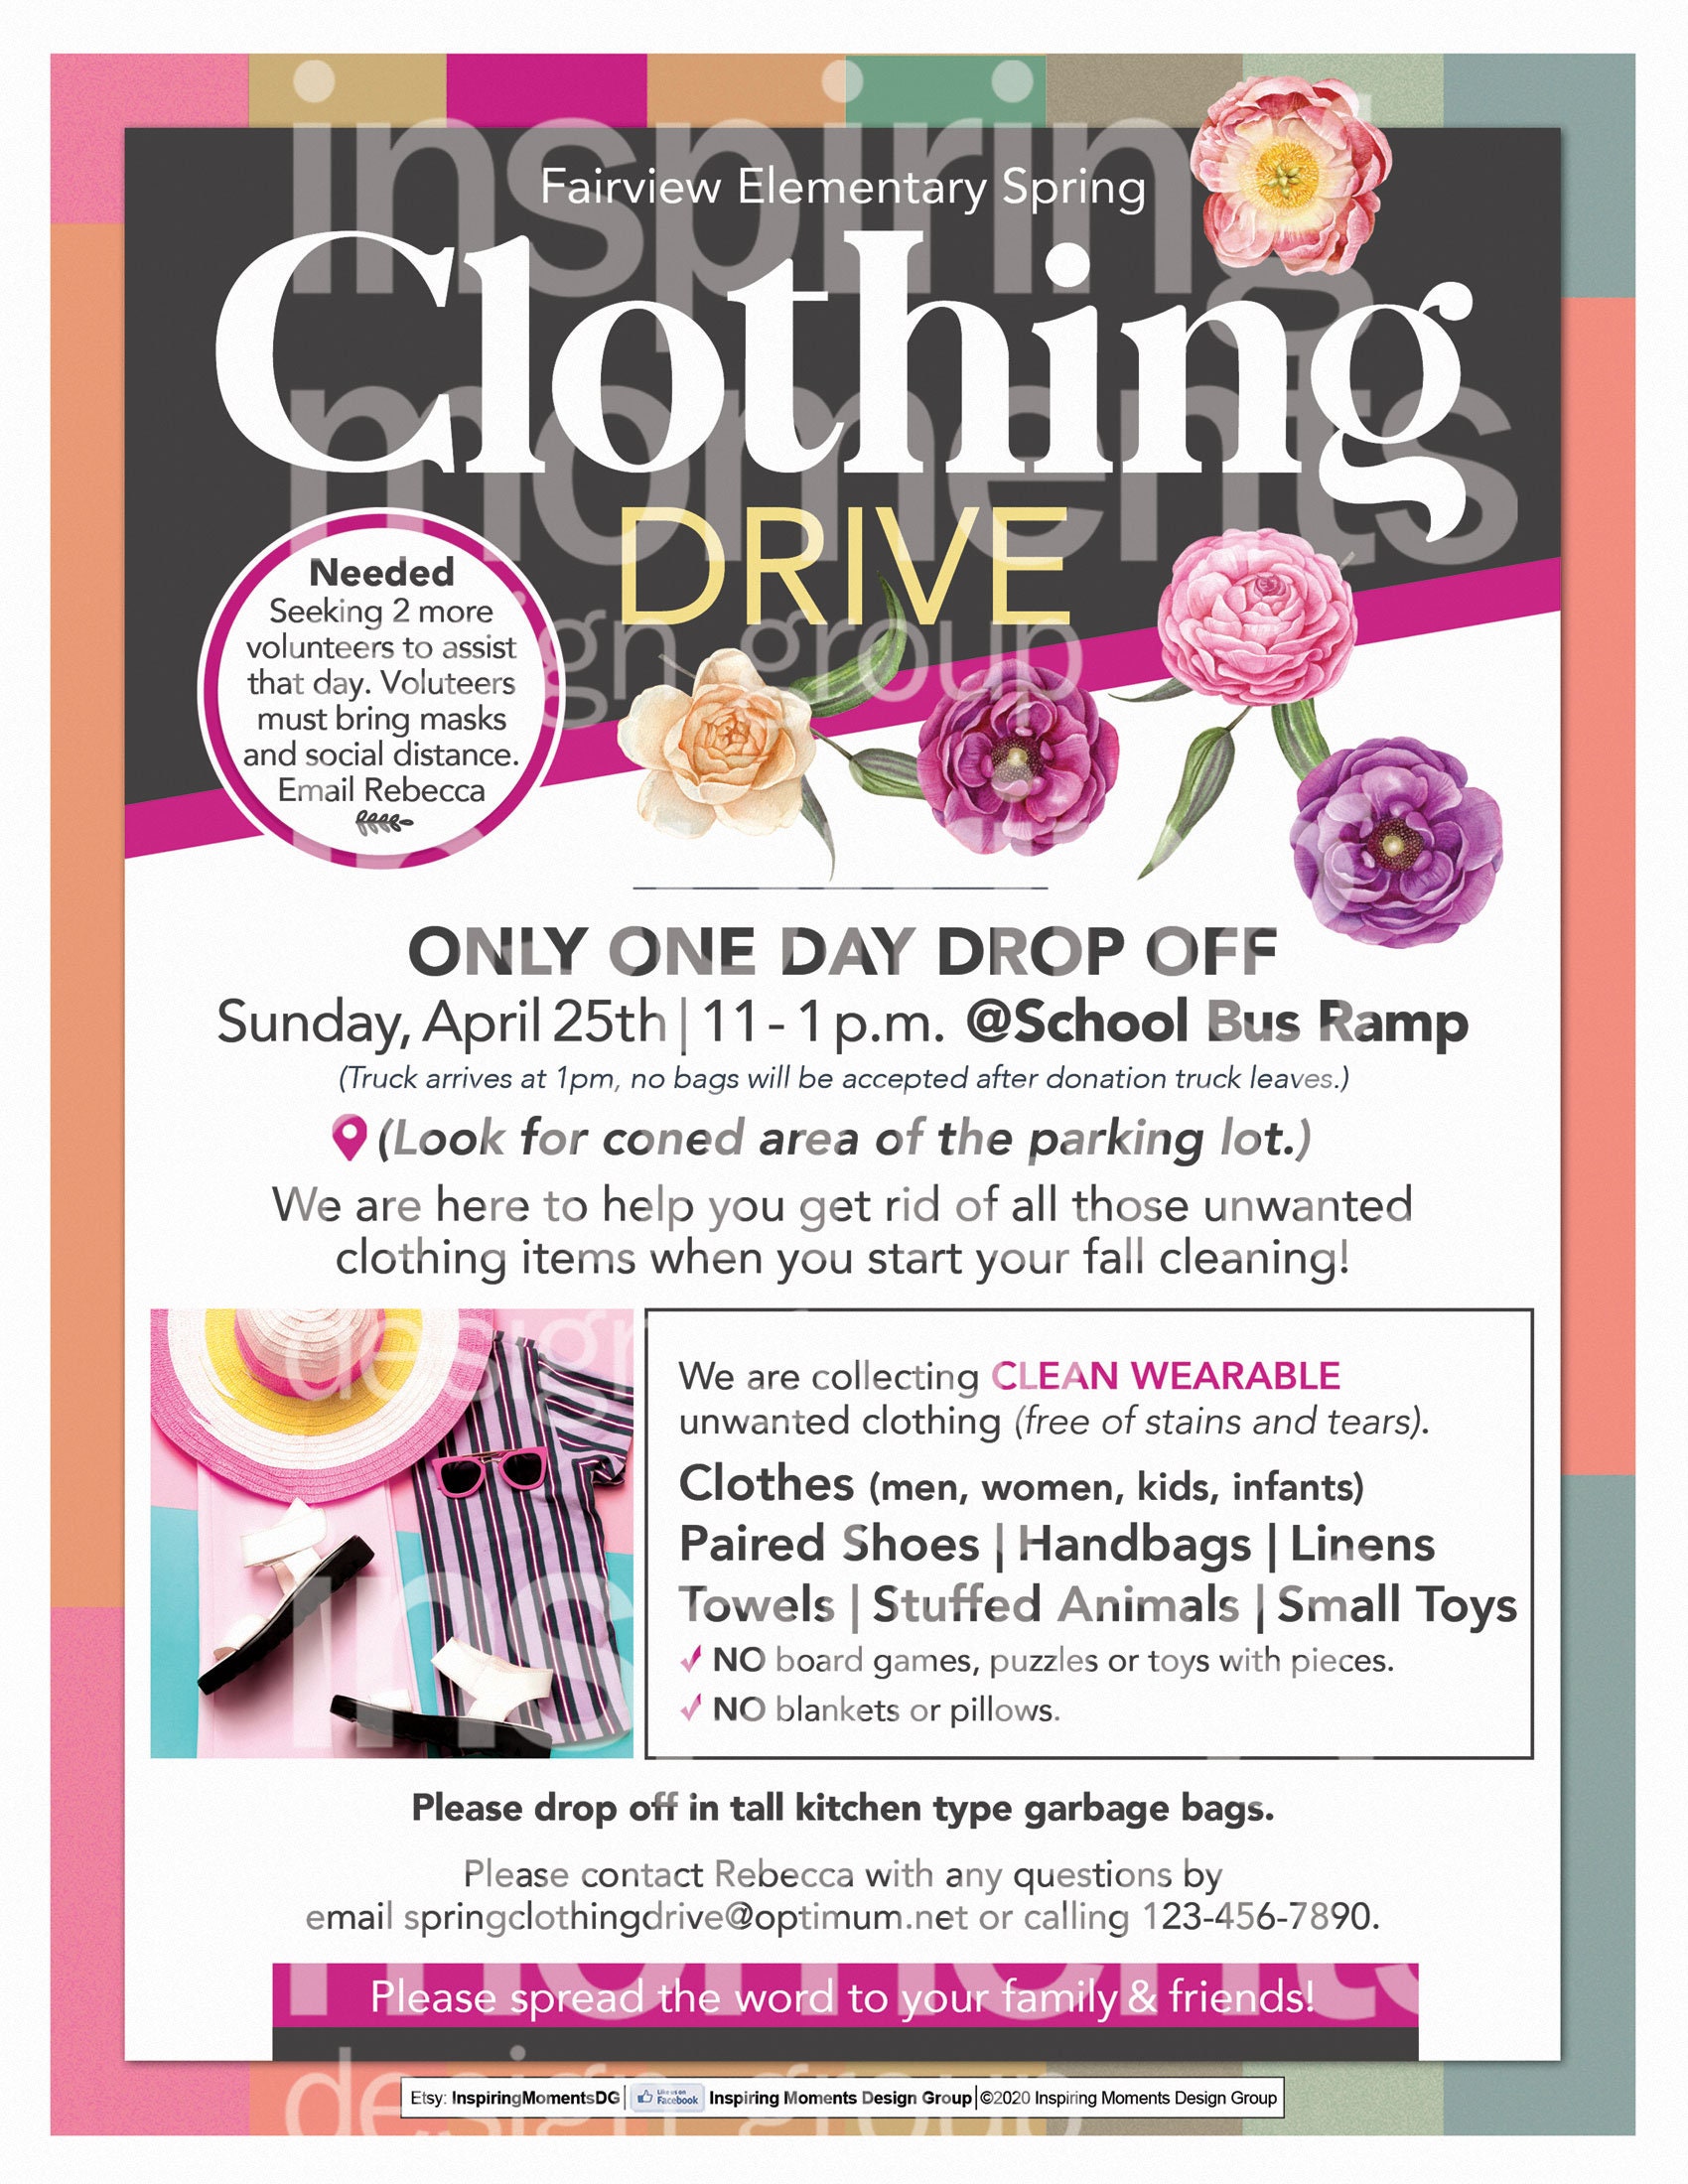 Clothing Drive Event Flyer Printable Collection Fundraiser - Etsy UK